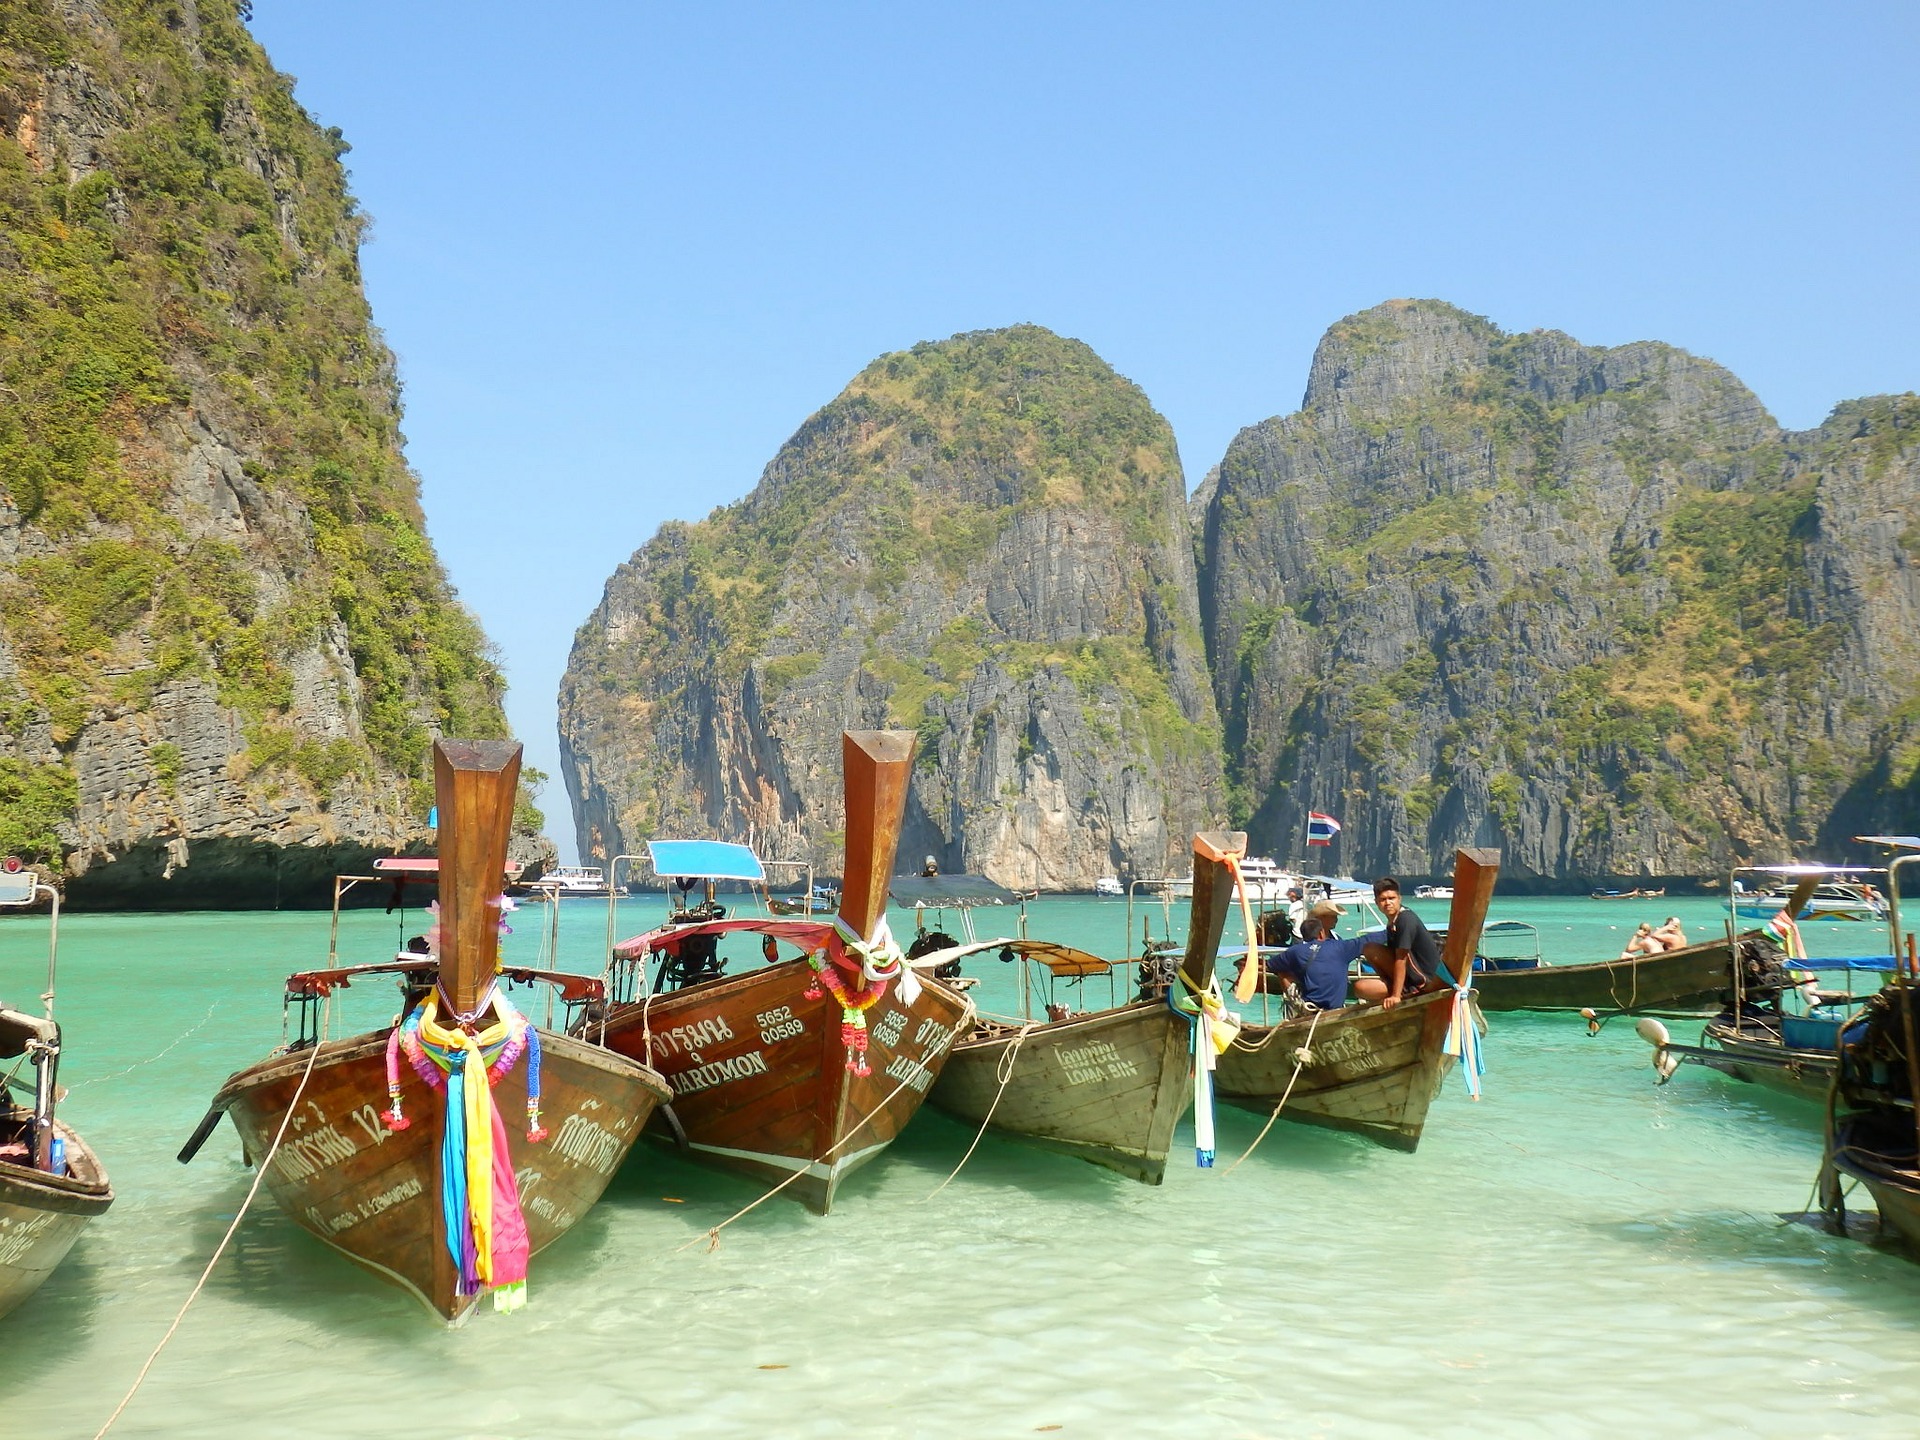 Thailand In 2 Weeks- My Beach Itinerary